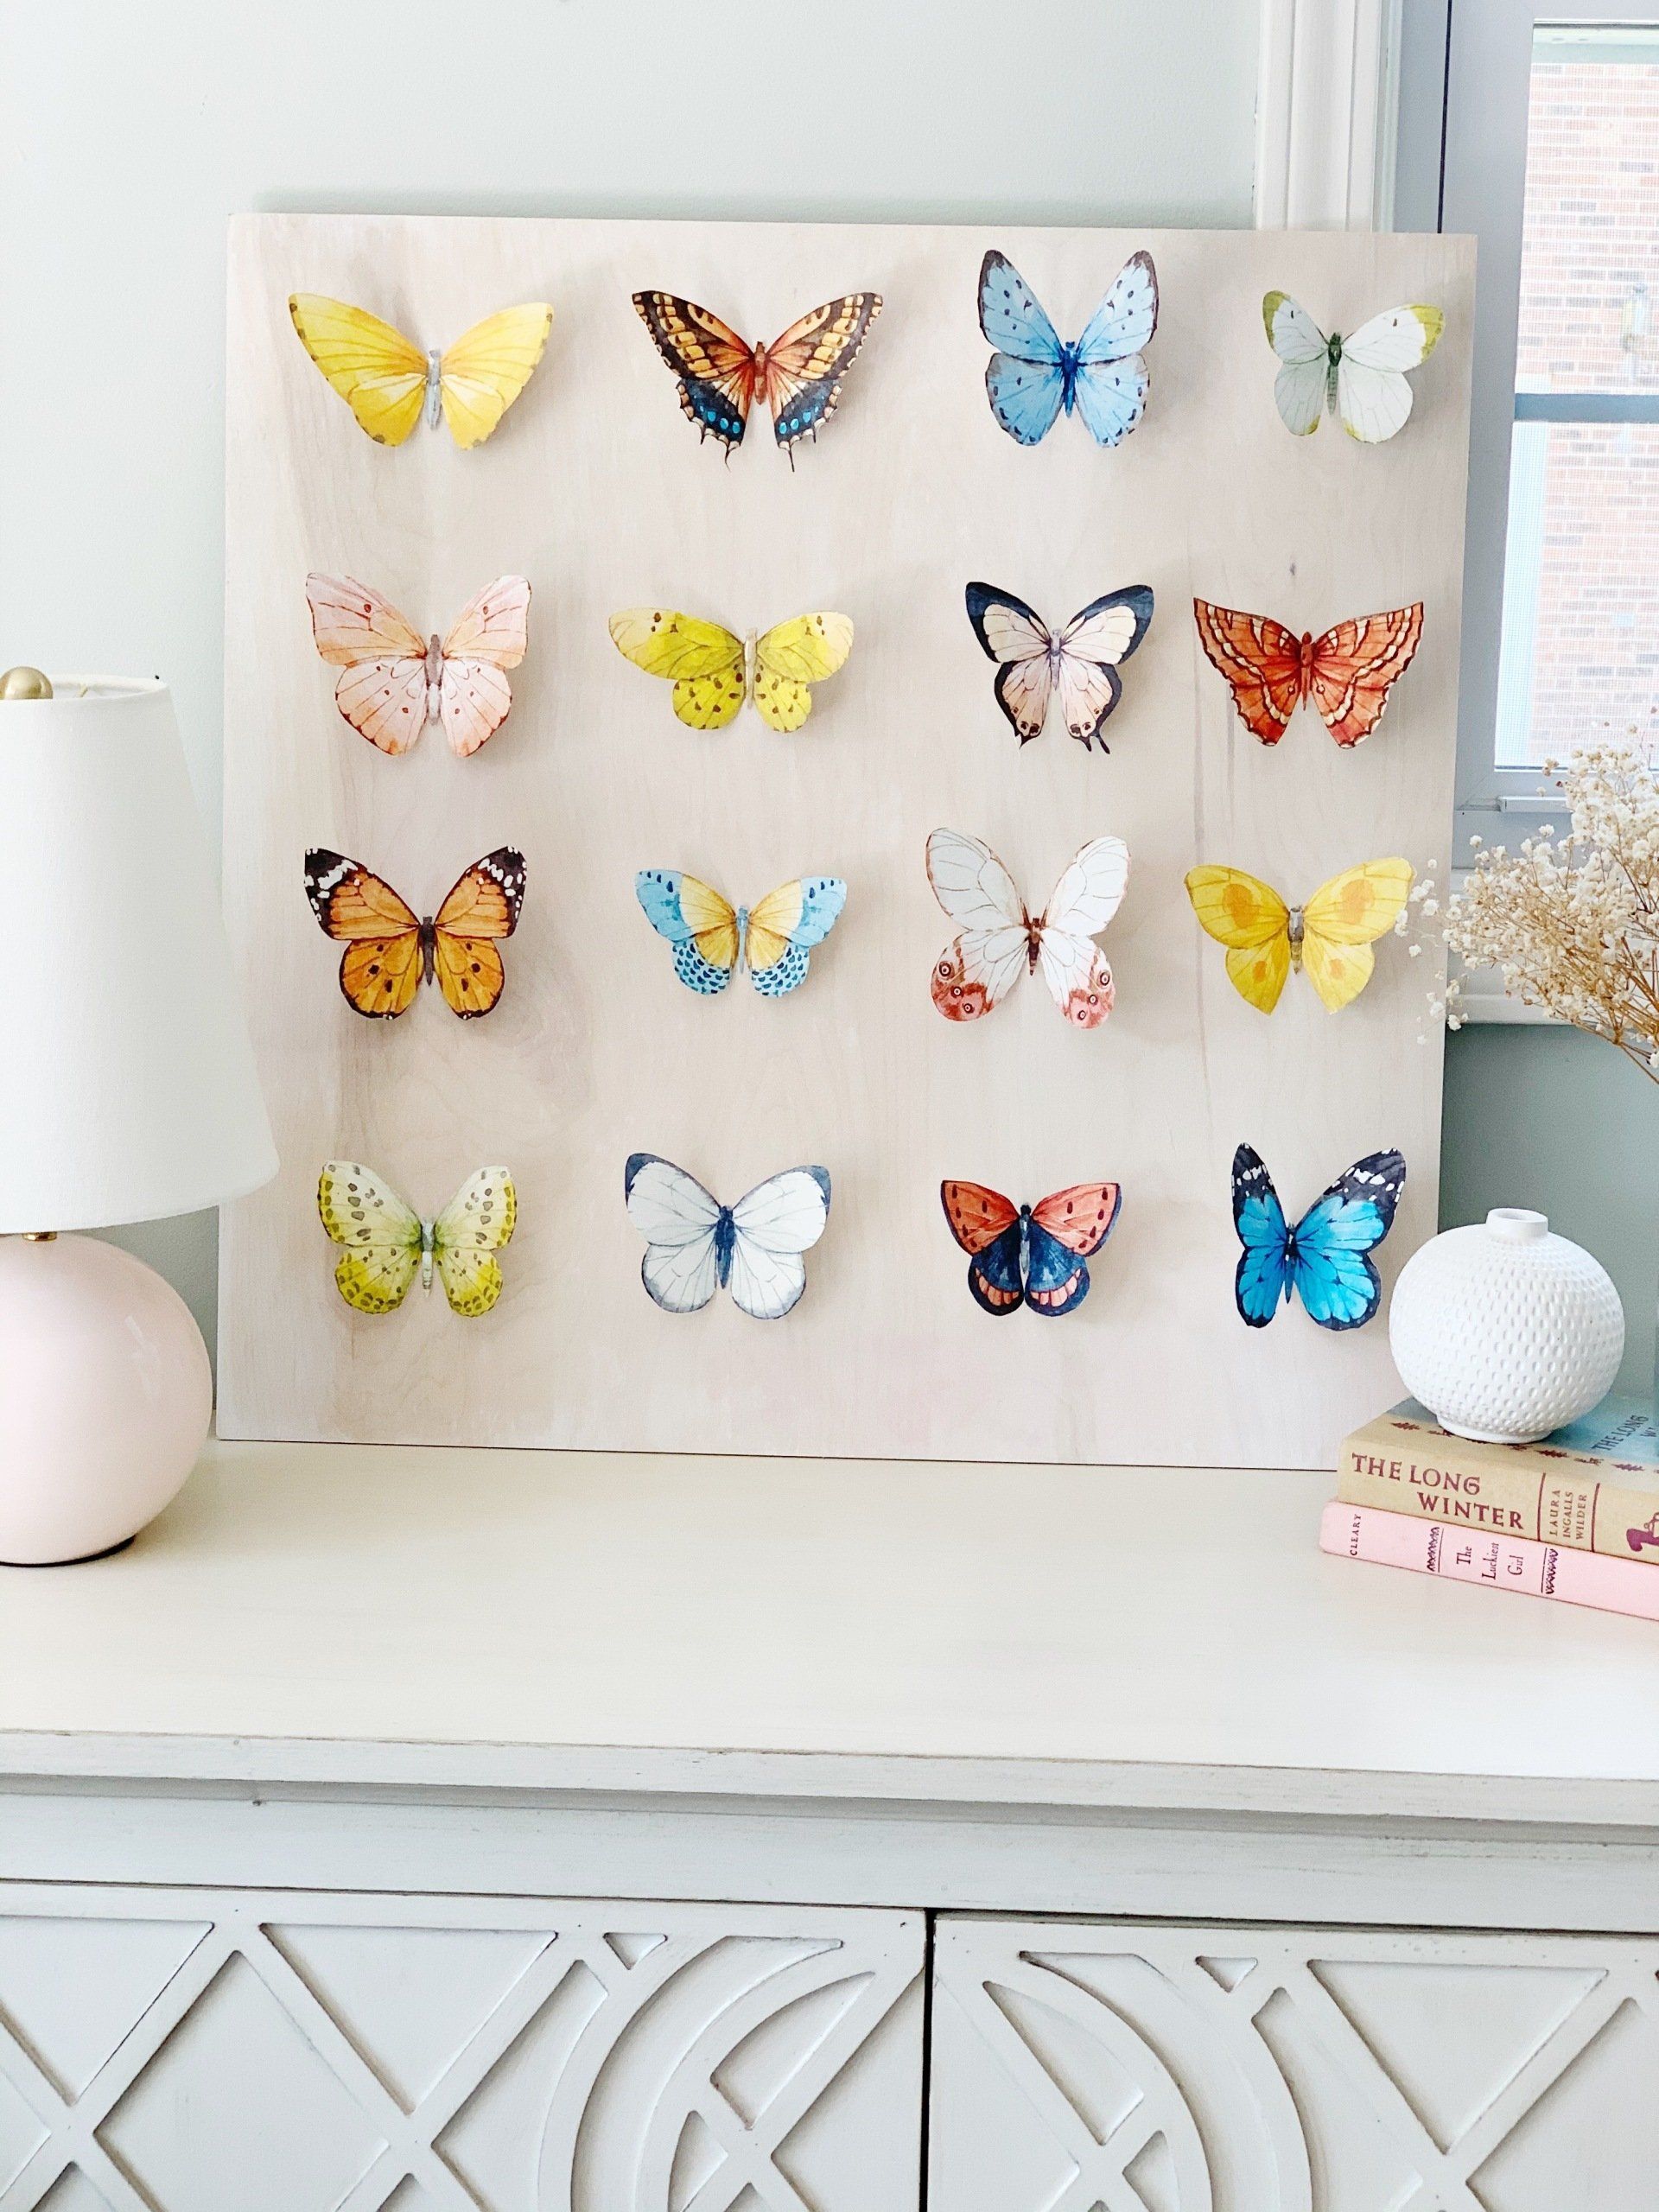 Butterflies for Crafts,Butterfly Wall Decor,3D Butterfly Wall Single Wing  White